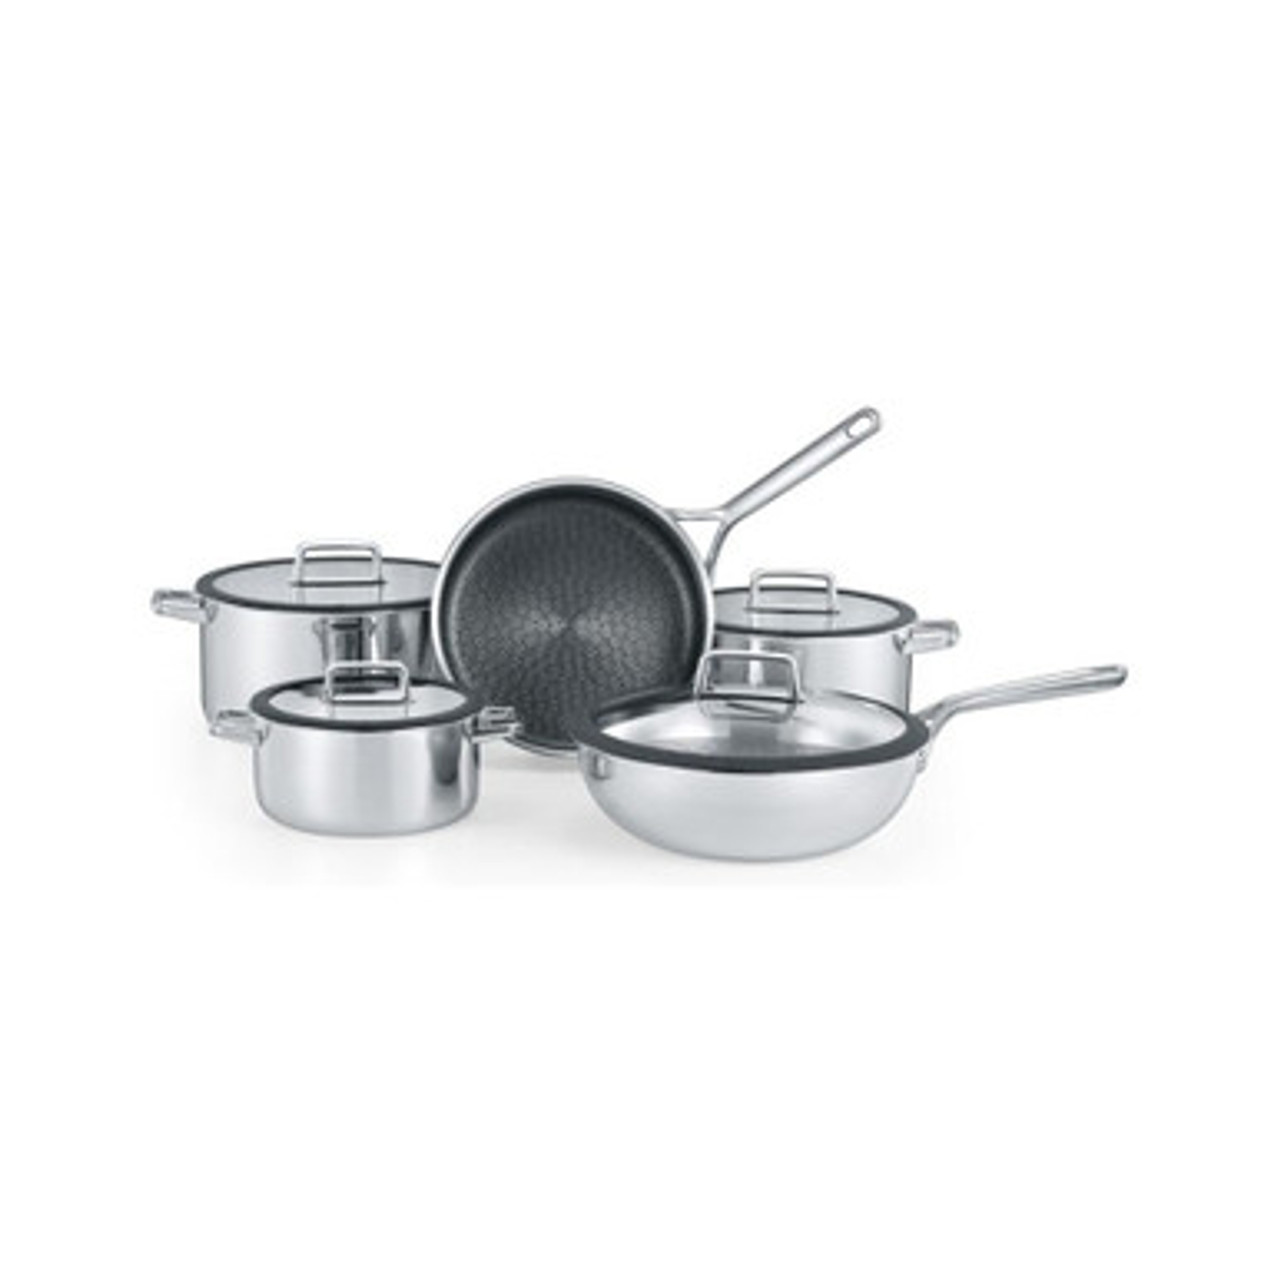 Arshia Stainless Steel Nonstick 10pcs set Heavy Duty Cookware